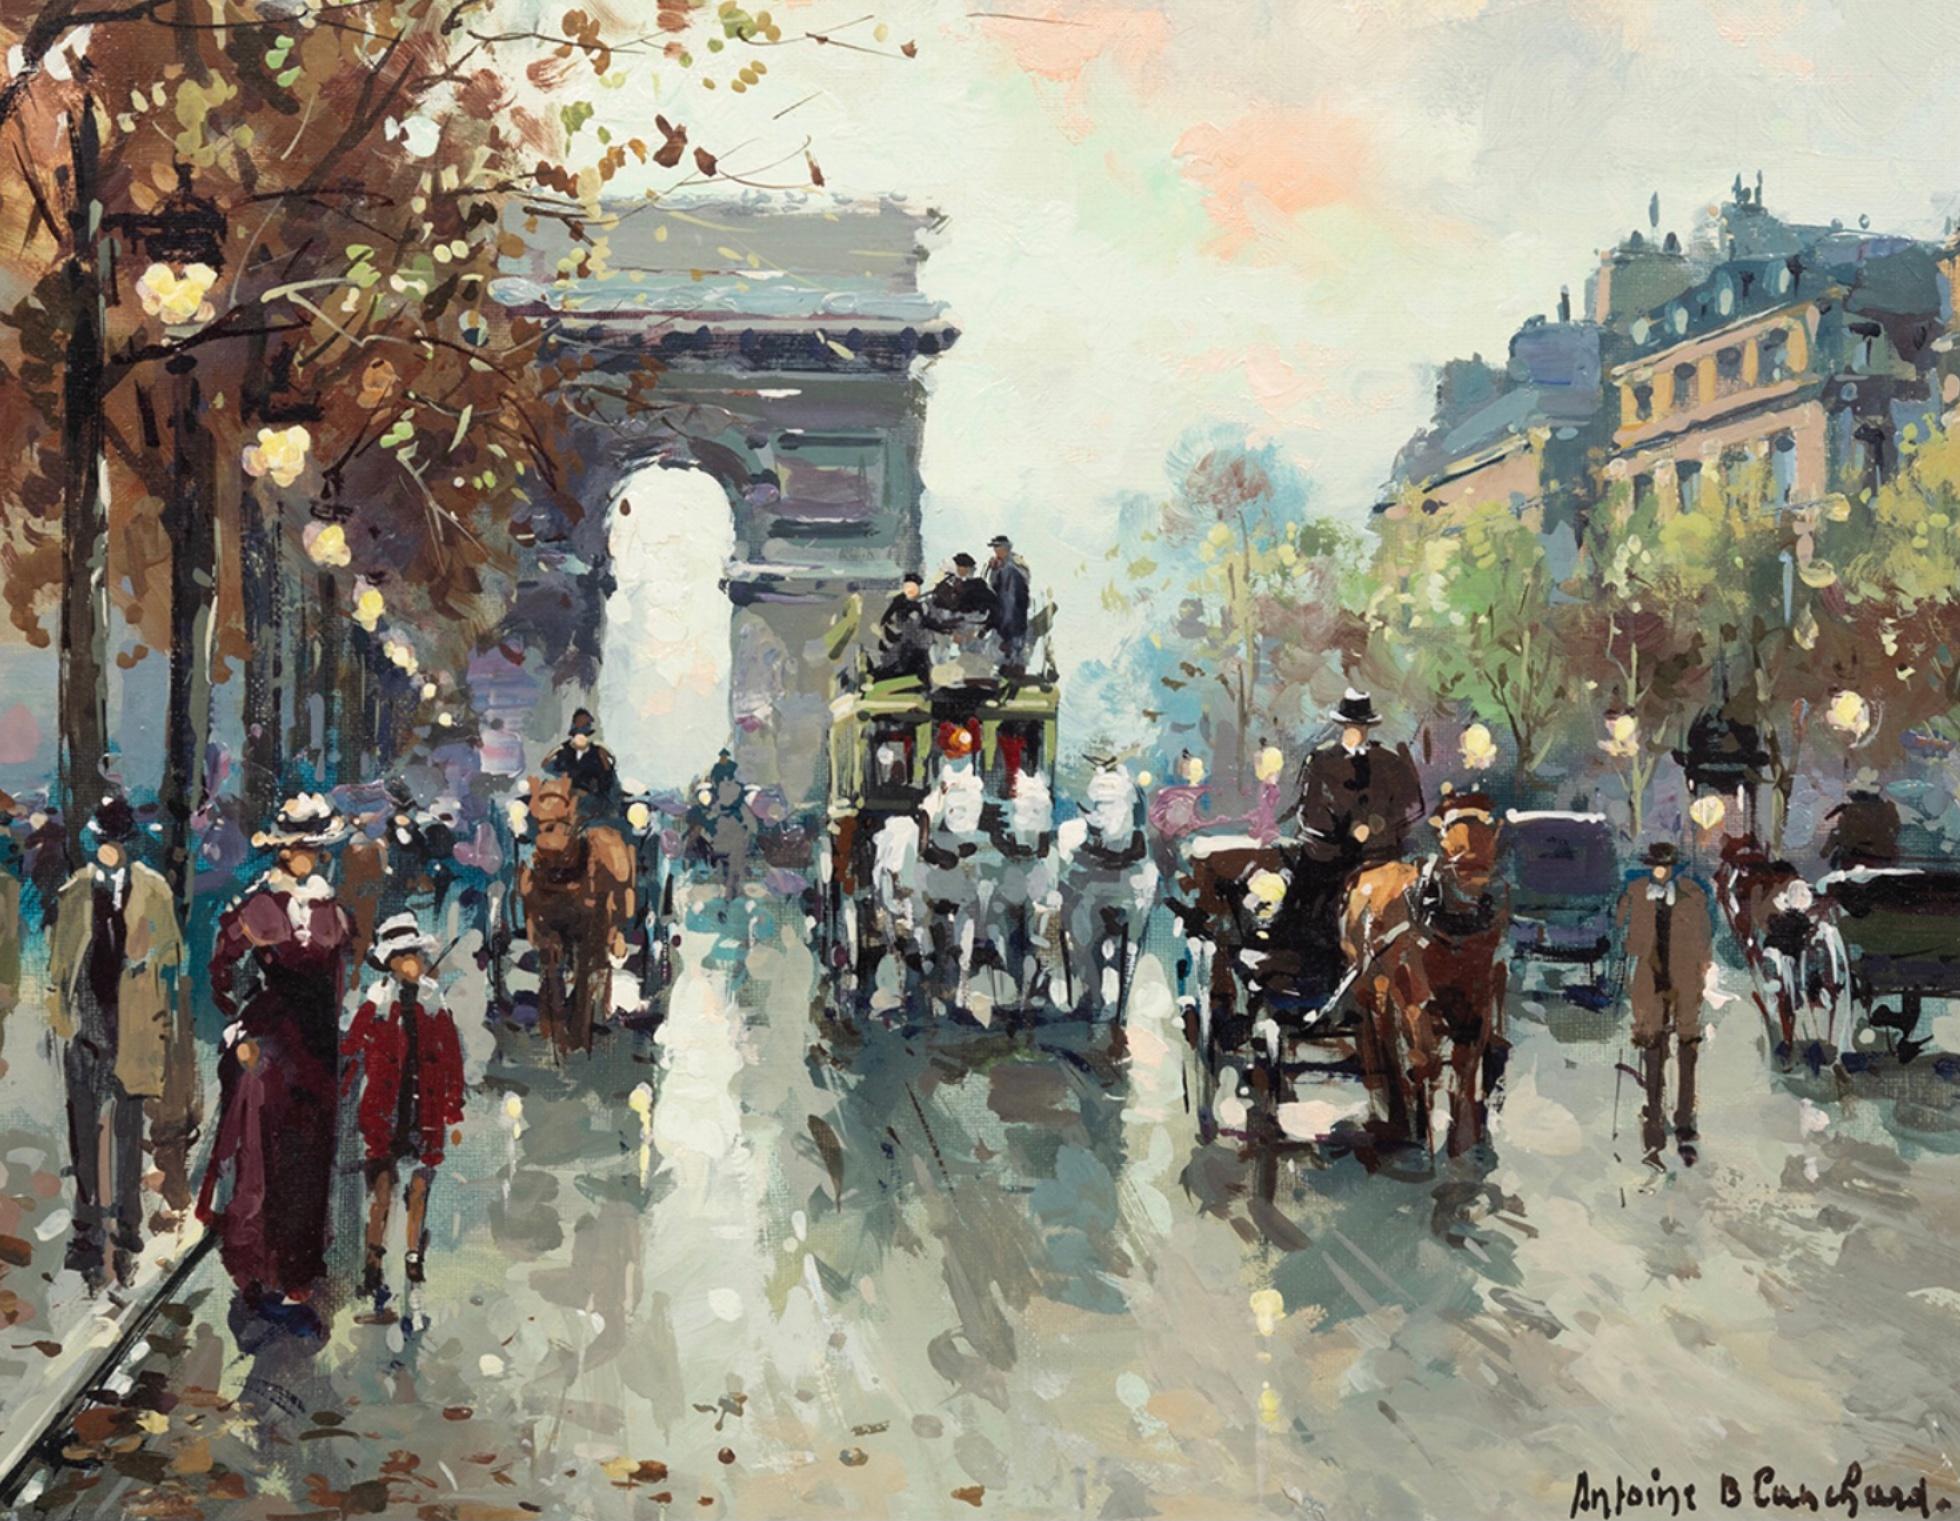 Antoine Blanchard (1910 - 1988) Arc de Triomphe, Champs-Elysees

Antoine Blanchard Catalogue Raisonne # ATCES1318.0025 
This painting has been photographed and authenticated with the above catalogue number. Guaranteed Authentic.

Oil on canvas: 13 x